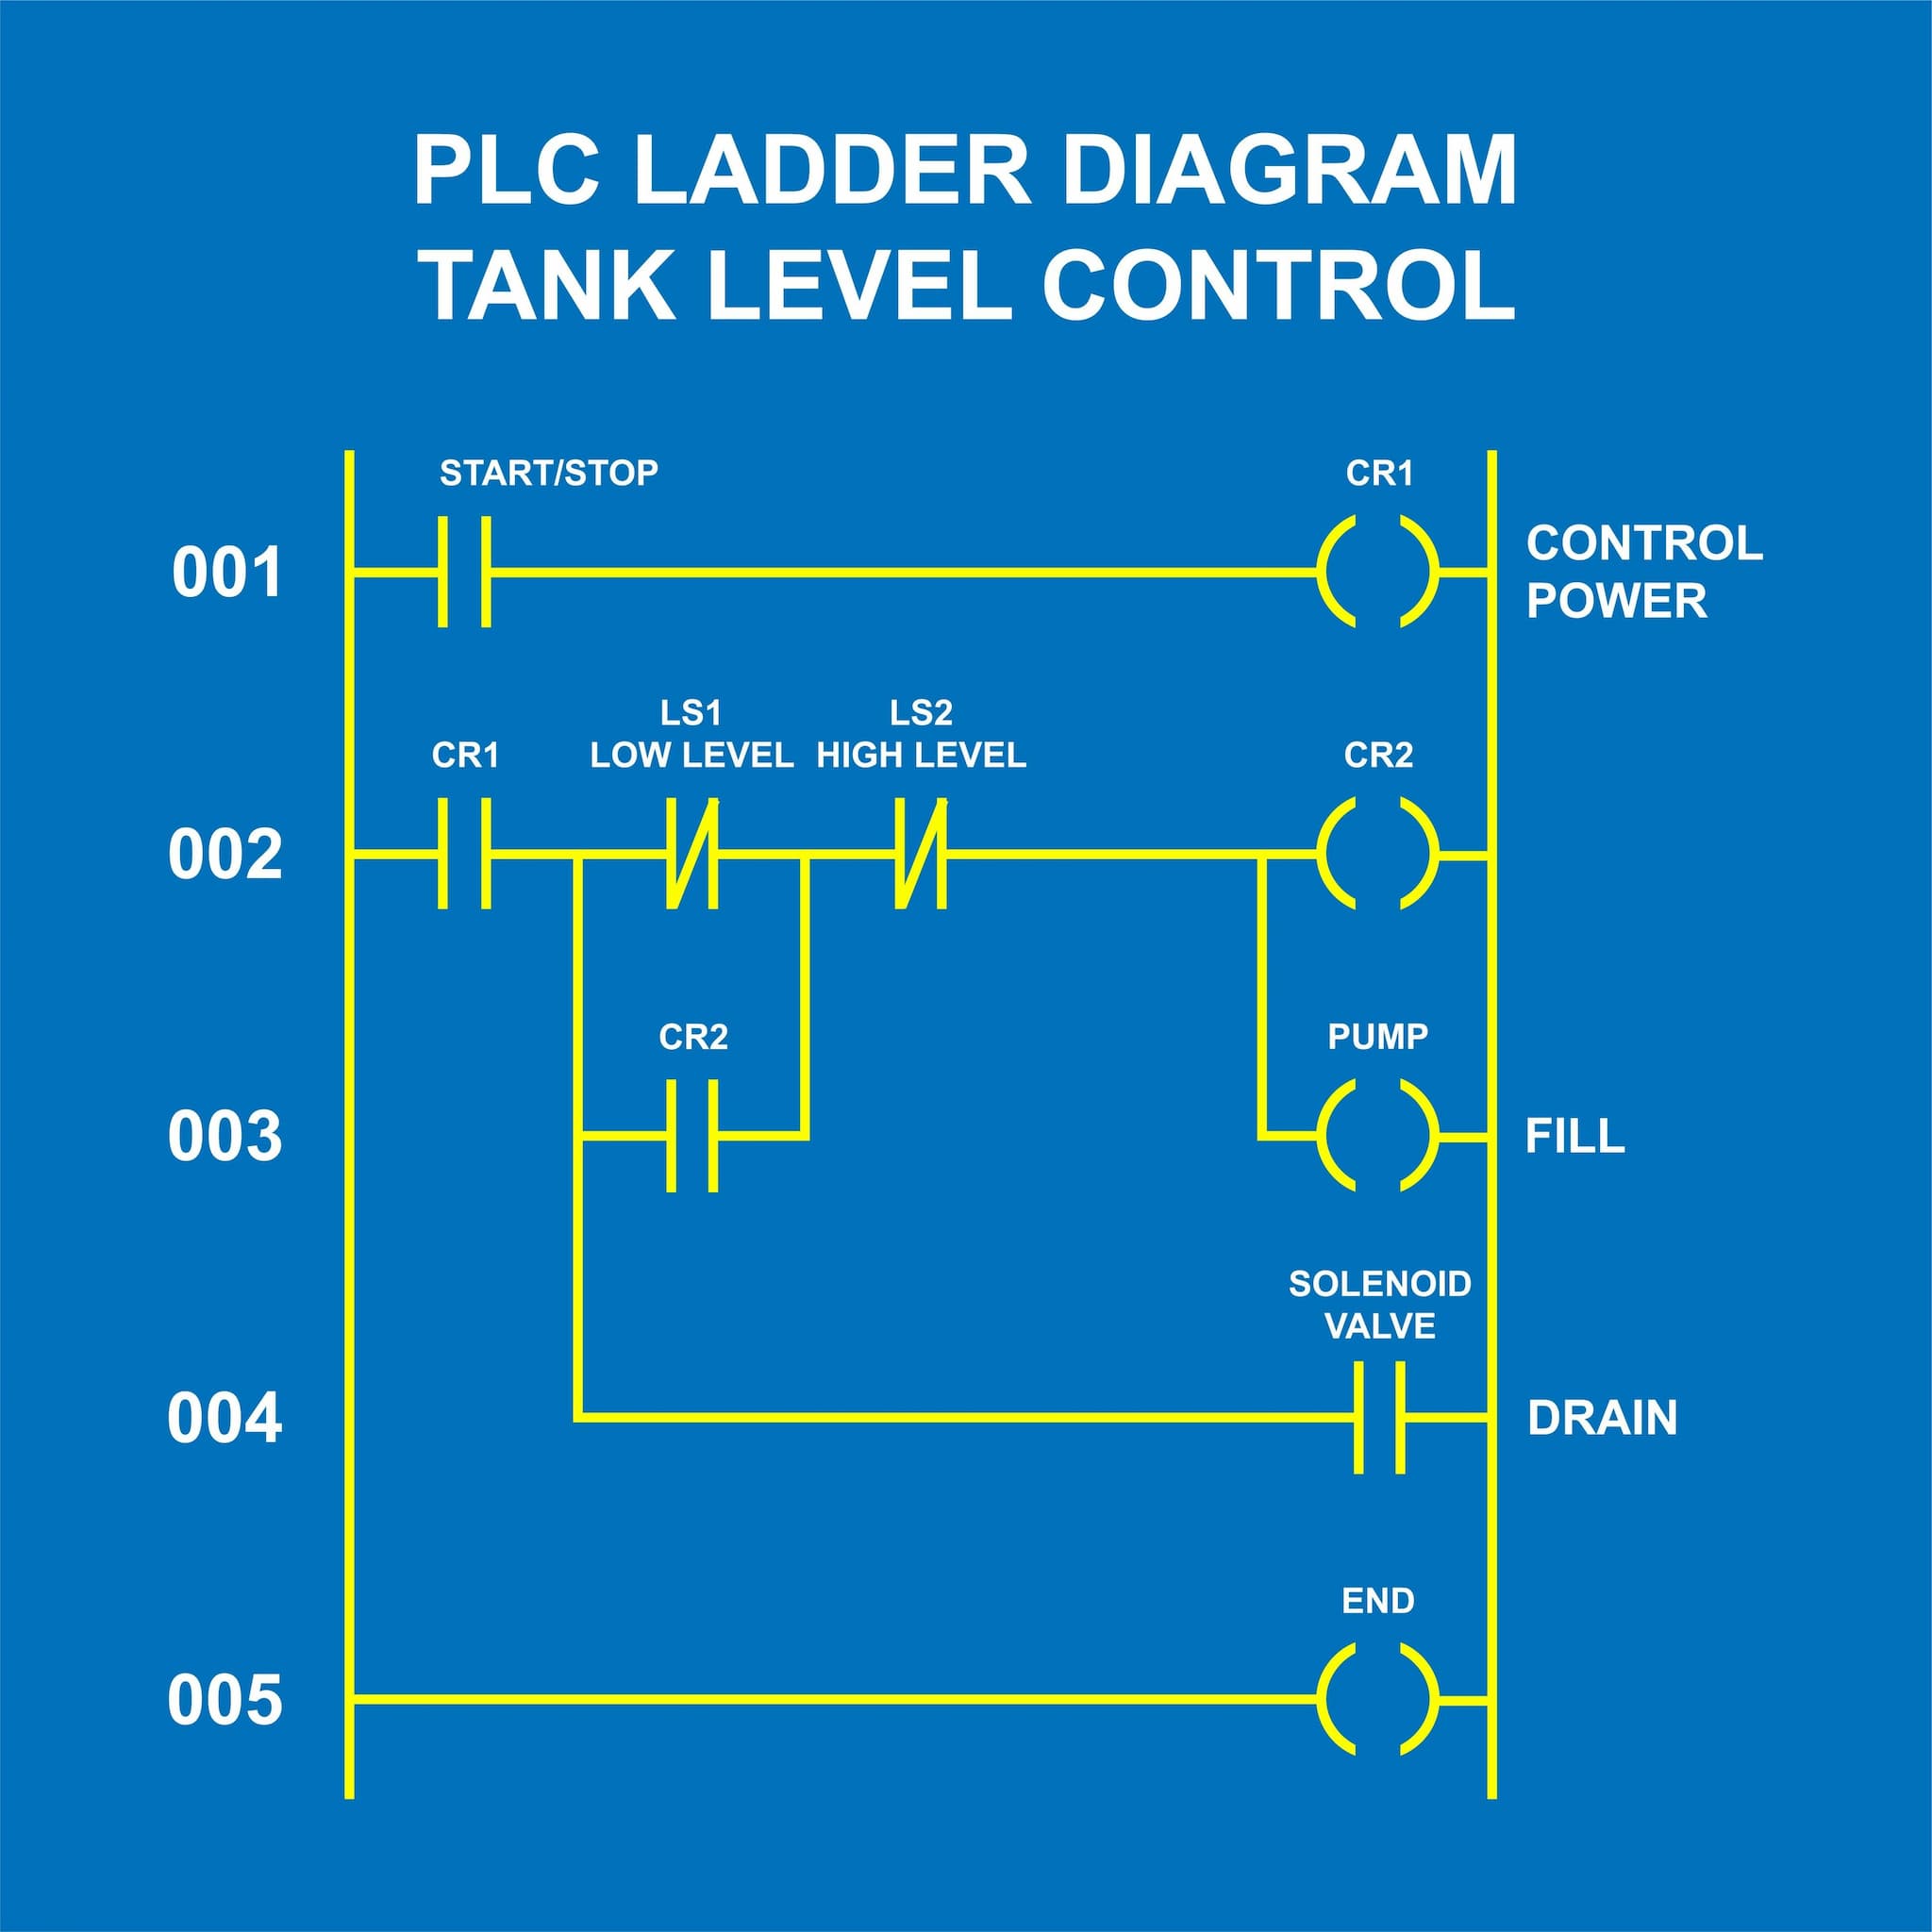 Ladder Diagram of PLC-operated Tank Level Control